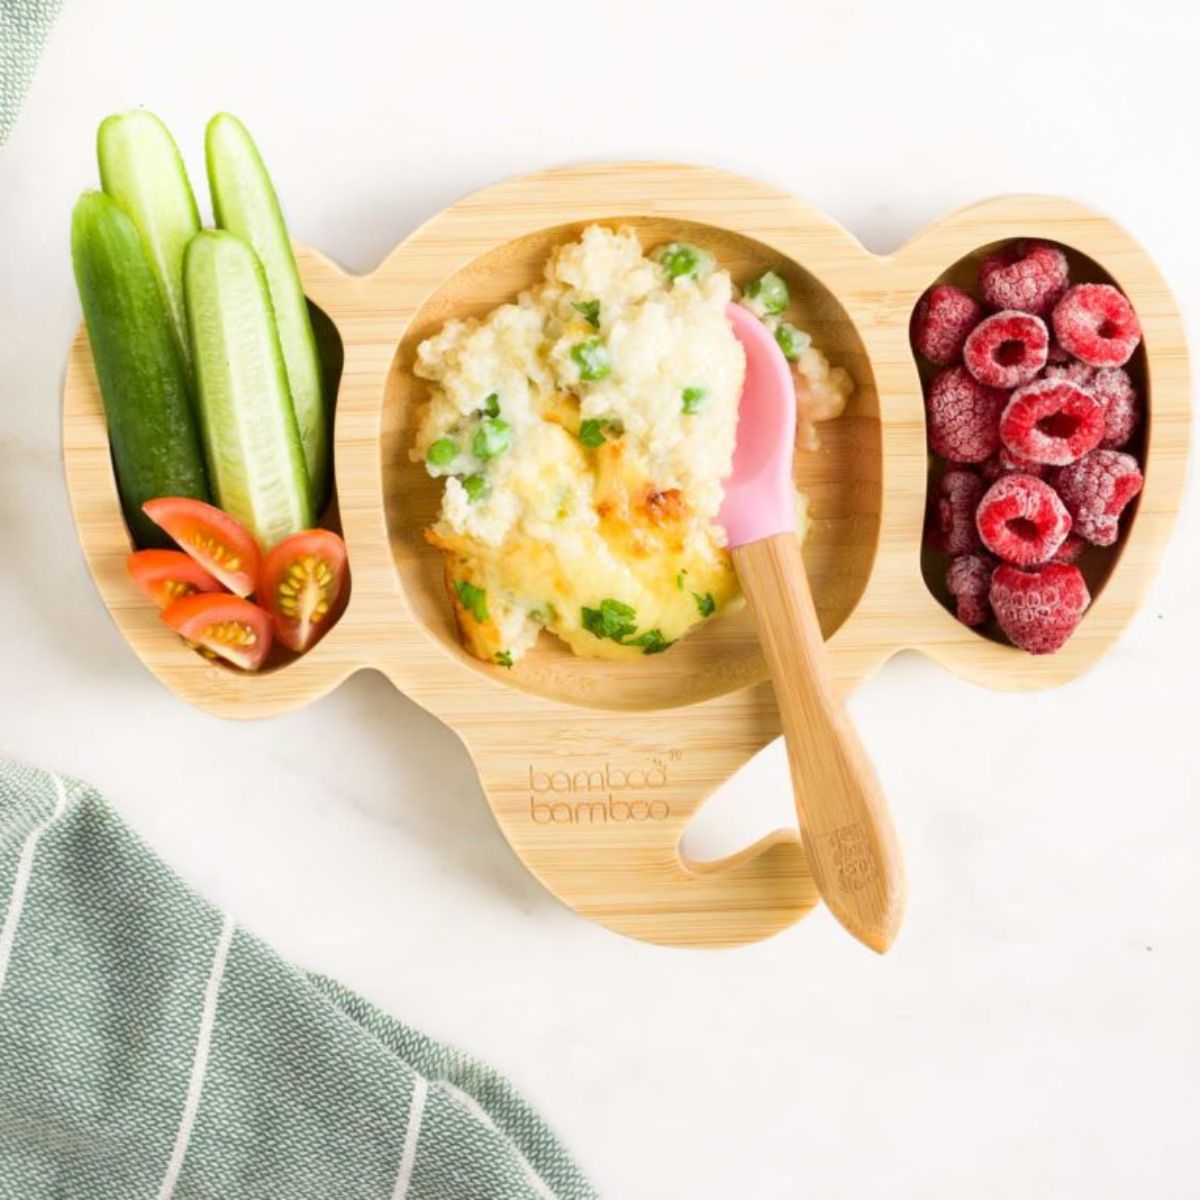 Delicious cheesy quinoa with fruits and veggies in a wooden bowl.